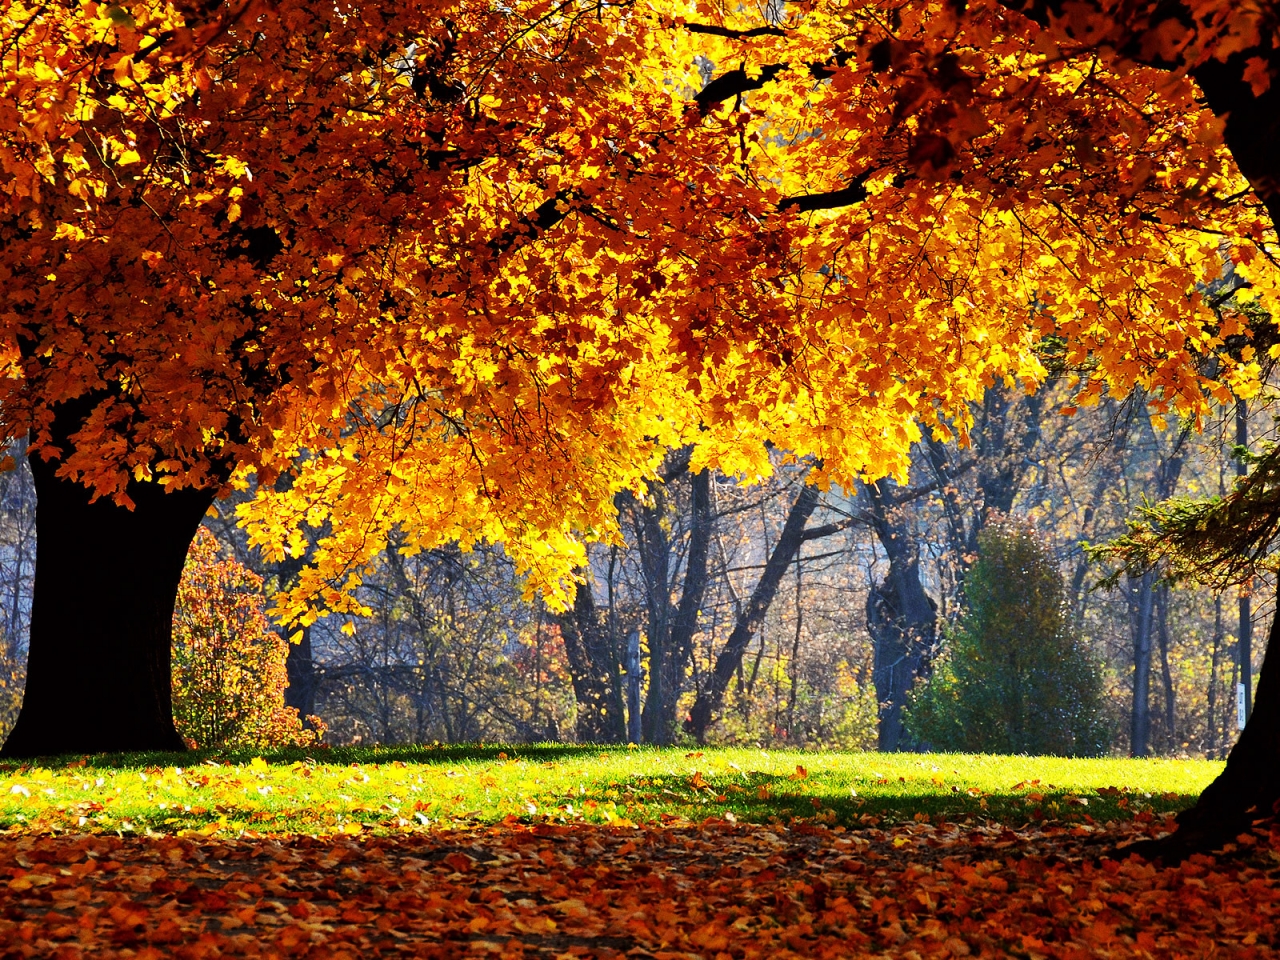 Autumn colors over trees for 1280 x 960 resolution